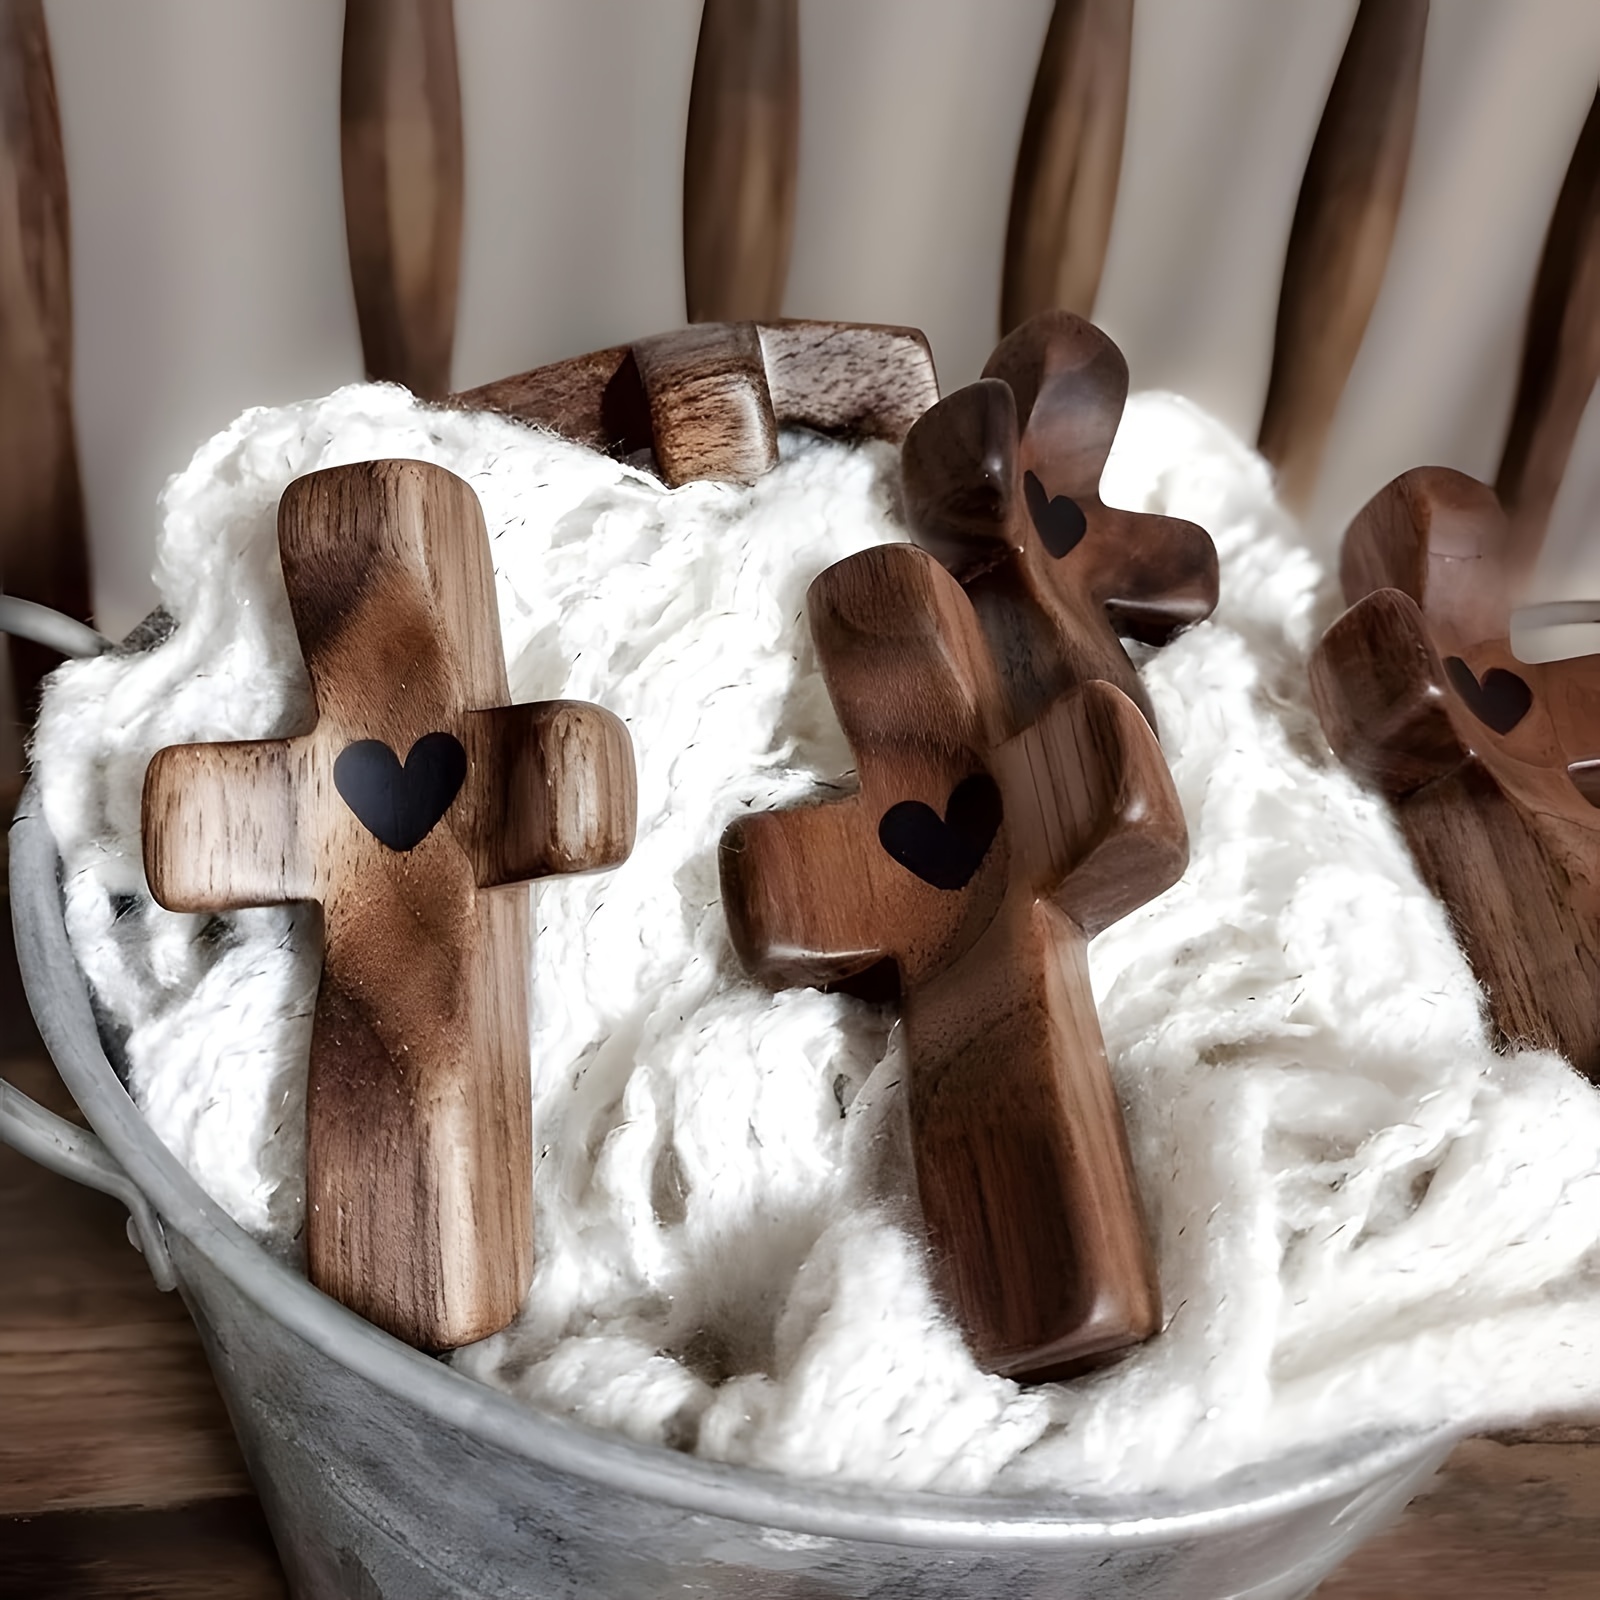 Cross My Heart  Handheld Wooden Cross With Epoxy Heart To Carry